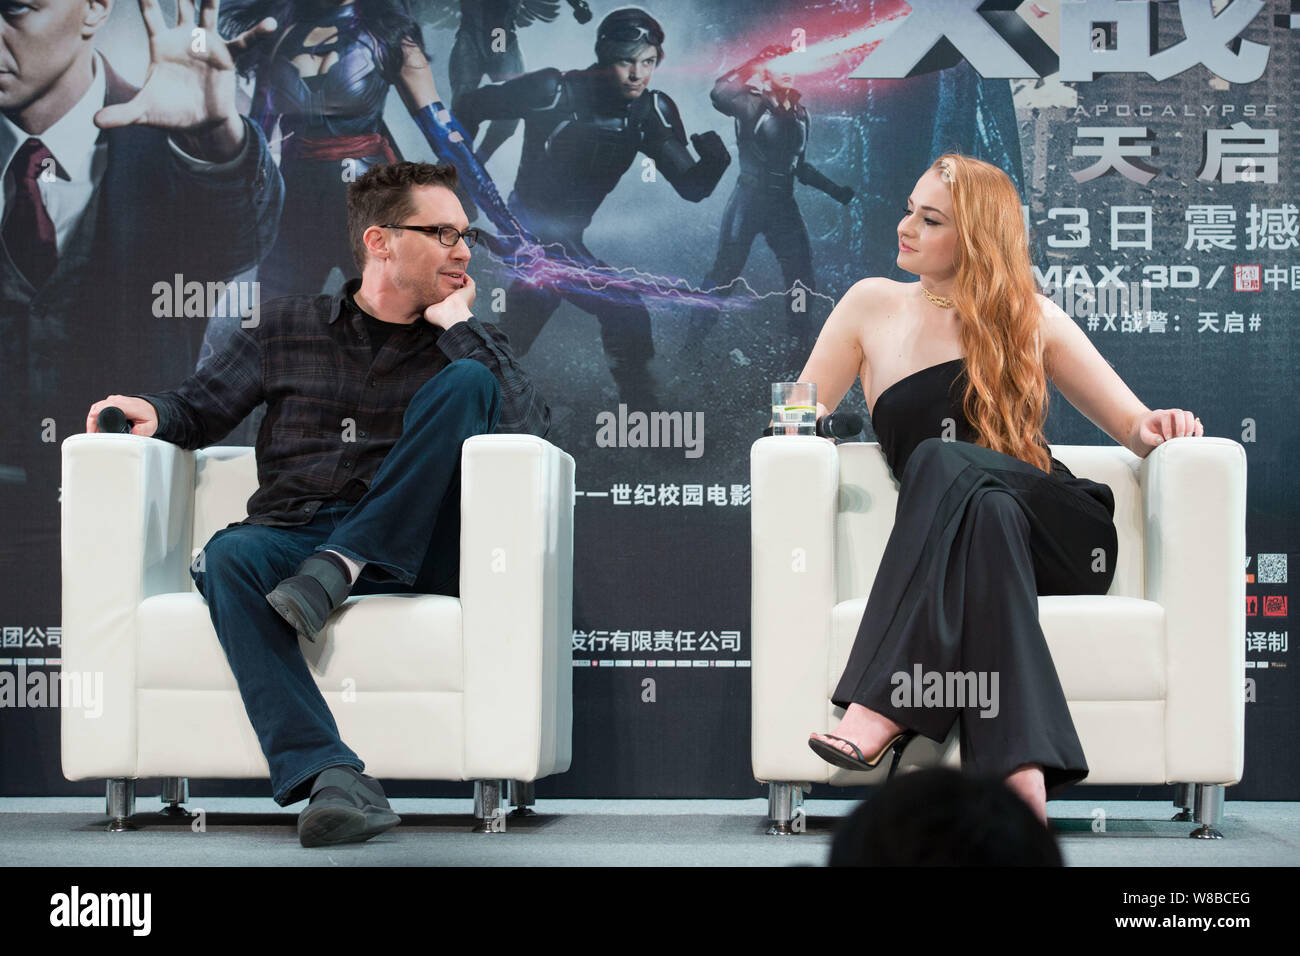 English actress Sophie Turner, right, and American director Bryan Singer attend a promotional event for their movie 'X-Men: Apocalypse' at Tsinghua Un Stock Photo